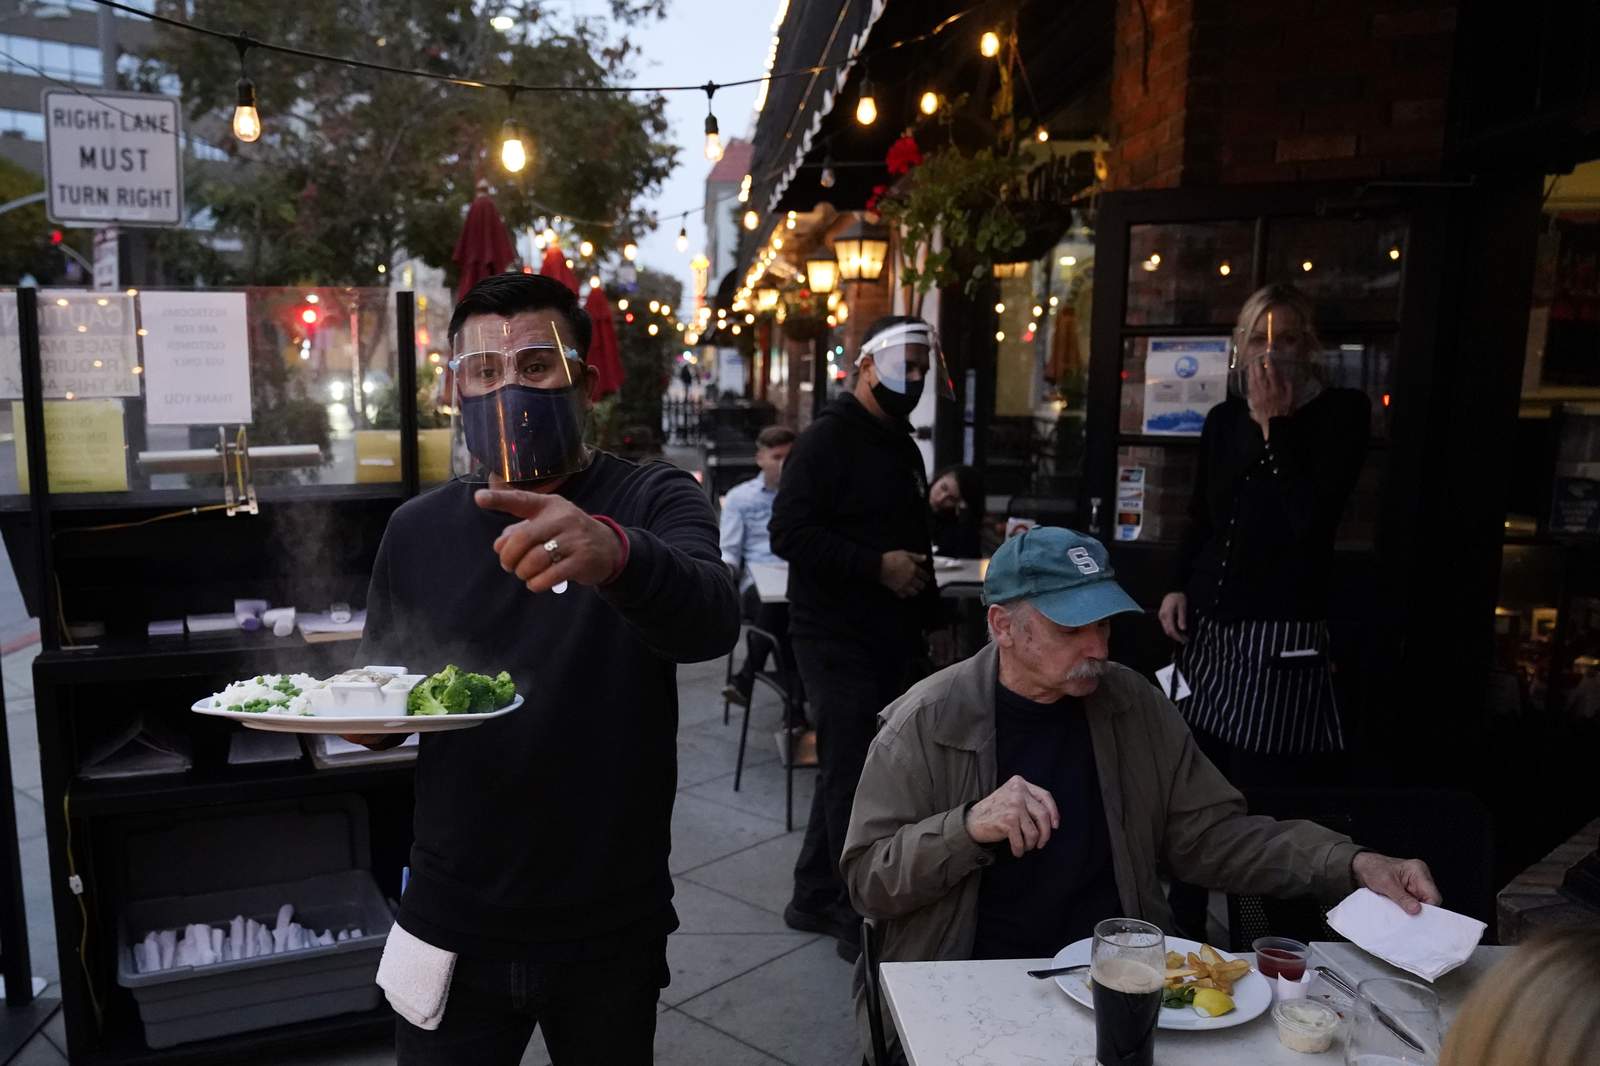 California pub tries to keep calm, carry on with virus rules